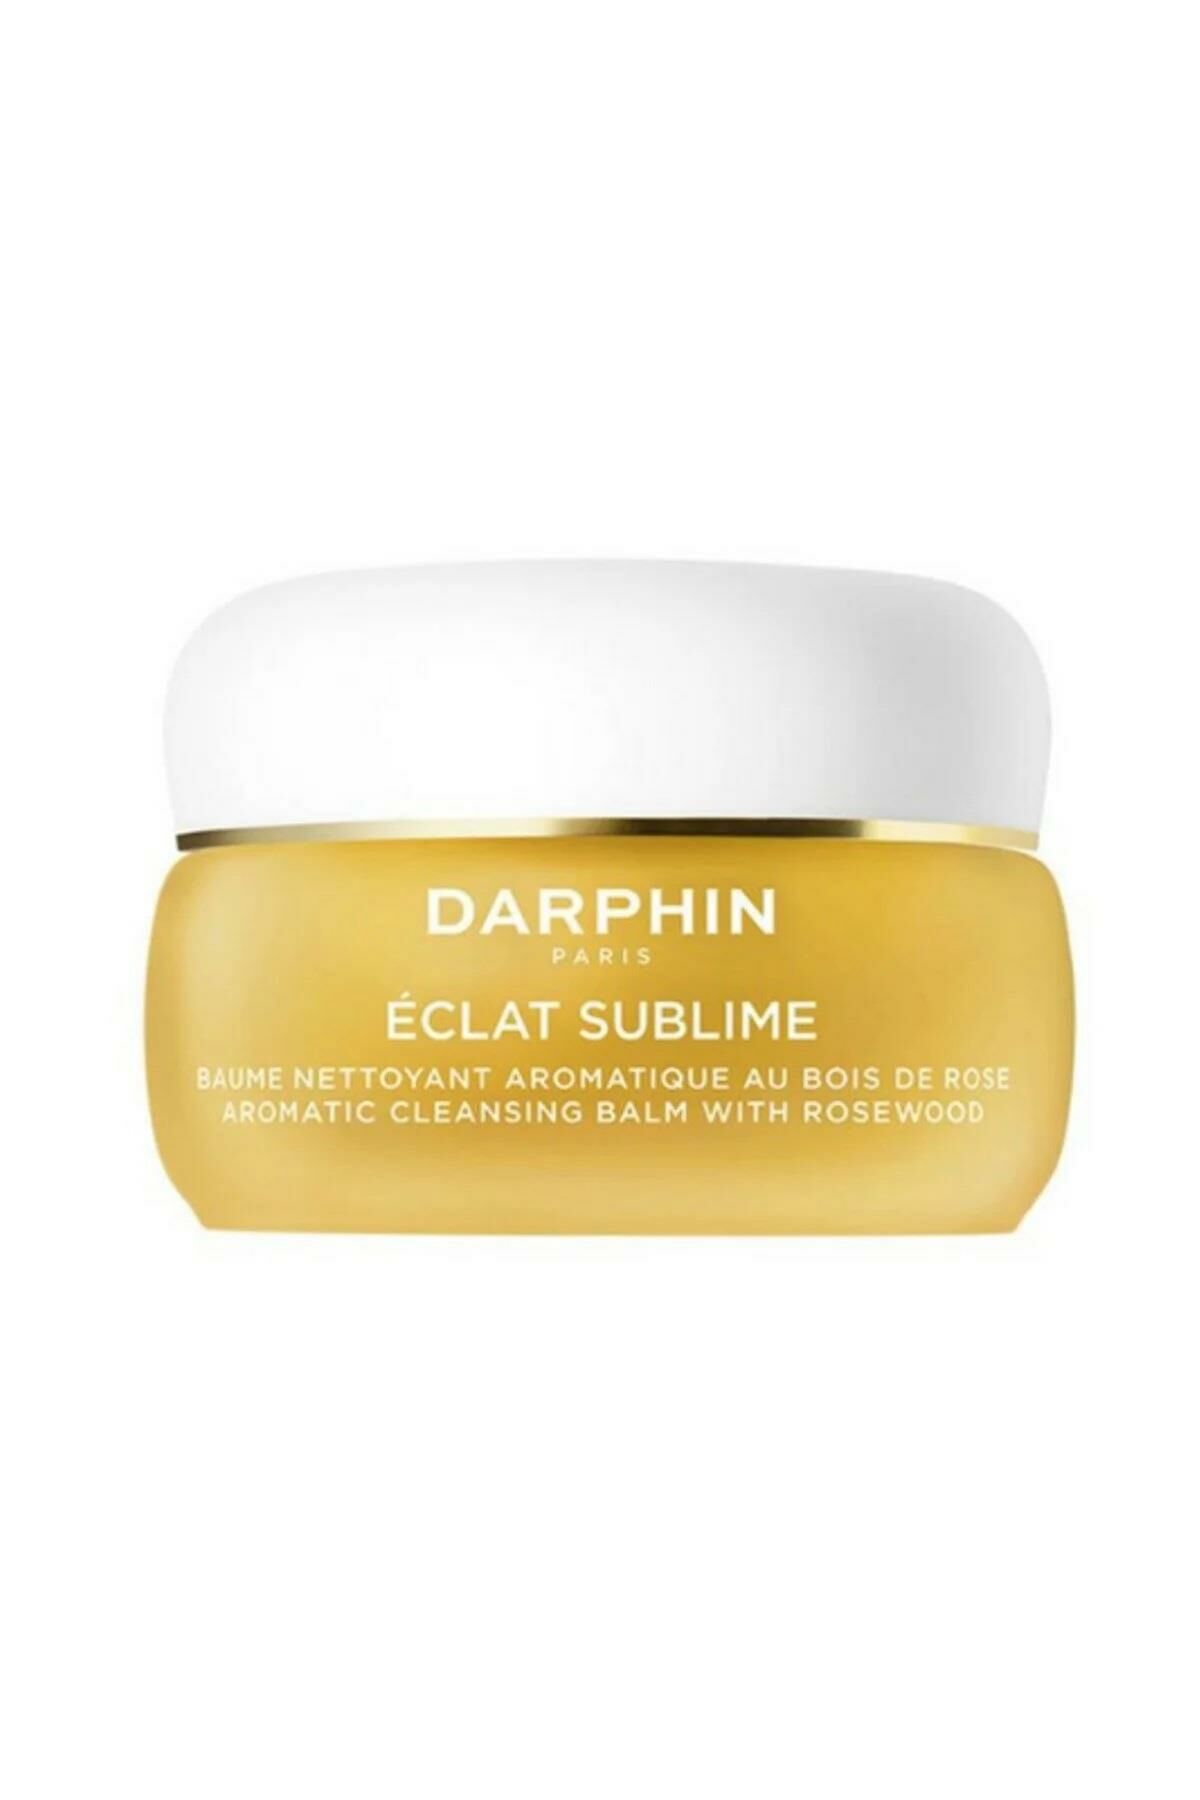 Darphin Eclat Sublime Aromatic Cleansing Balm With Rosewood 40 ml